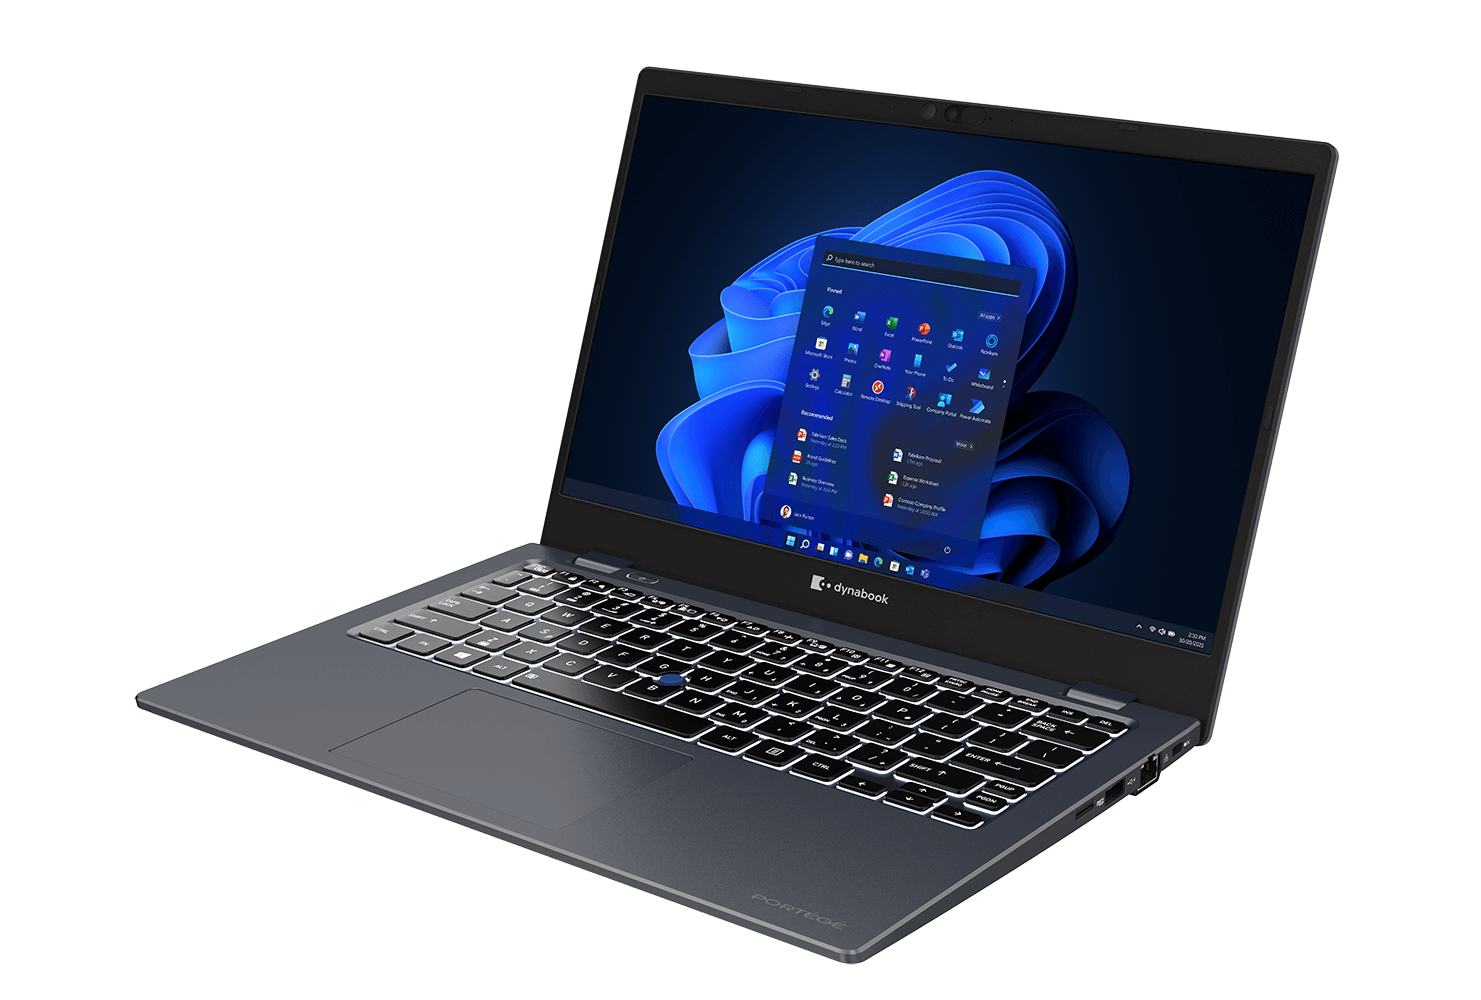 DYNABOOK REFRESHES PORTÉGÉ® X30L LAPTOP WITH ADDED DURABILITY AND INTEL® 12TH GEN CORE™